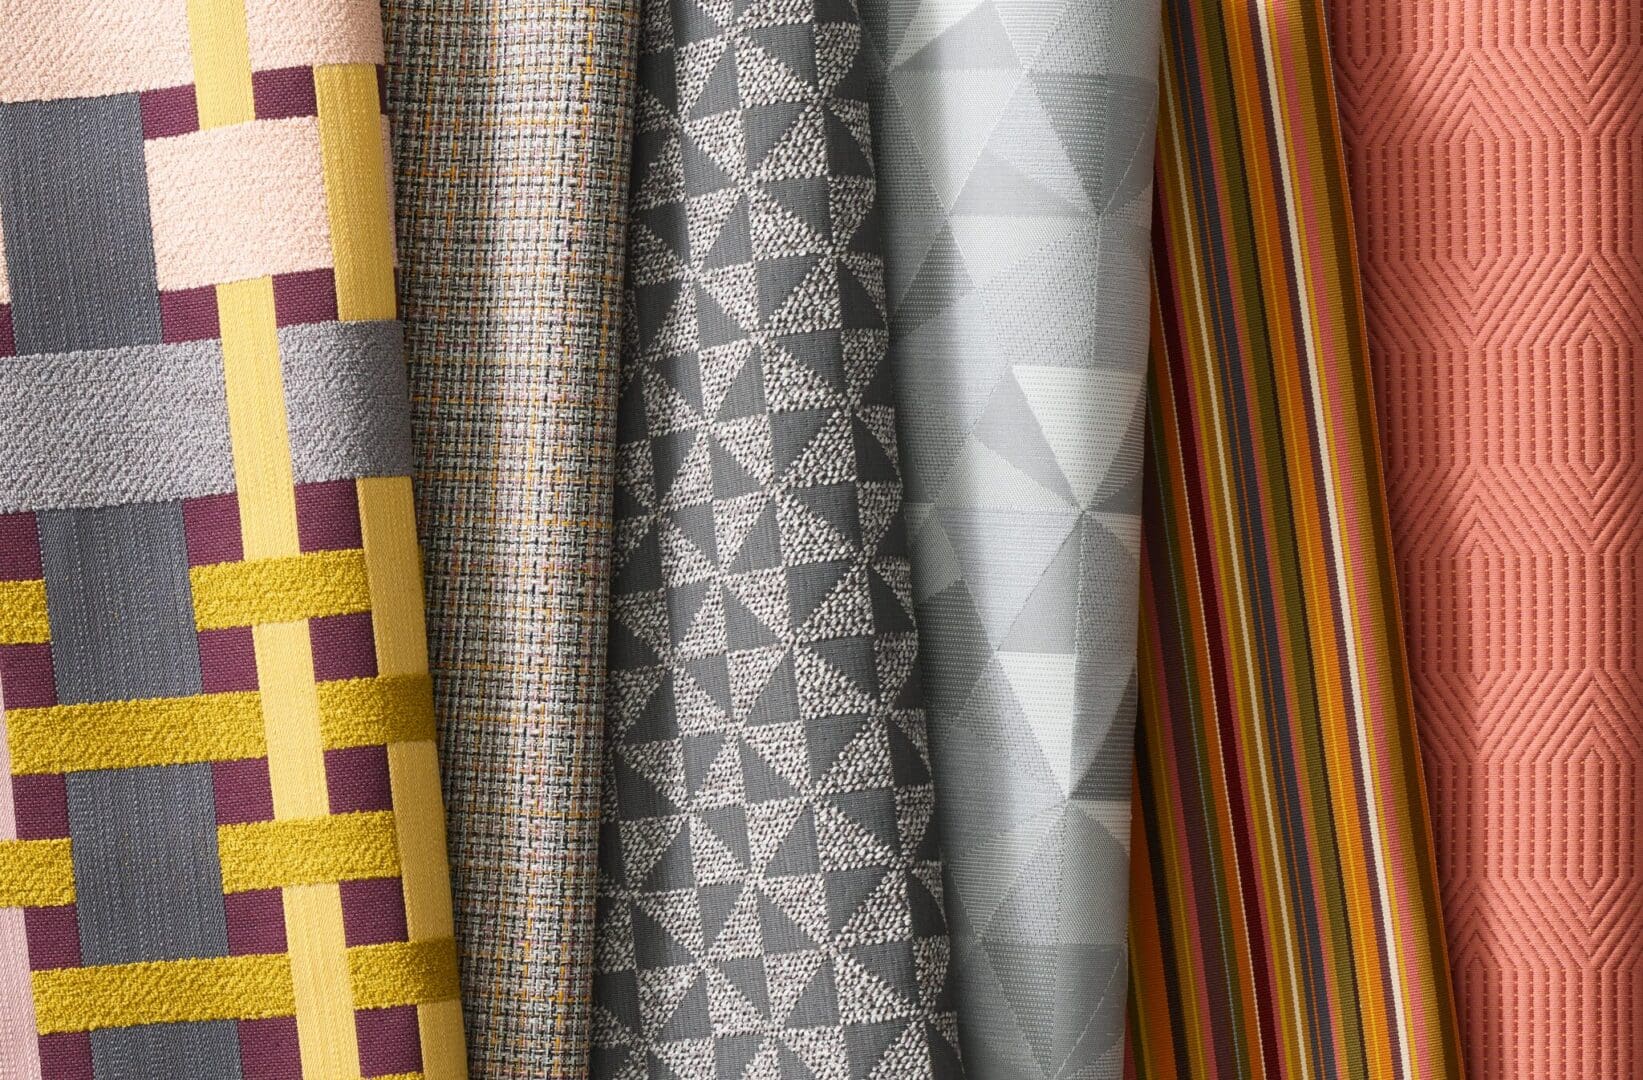 A close up of several different fabrics on display.